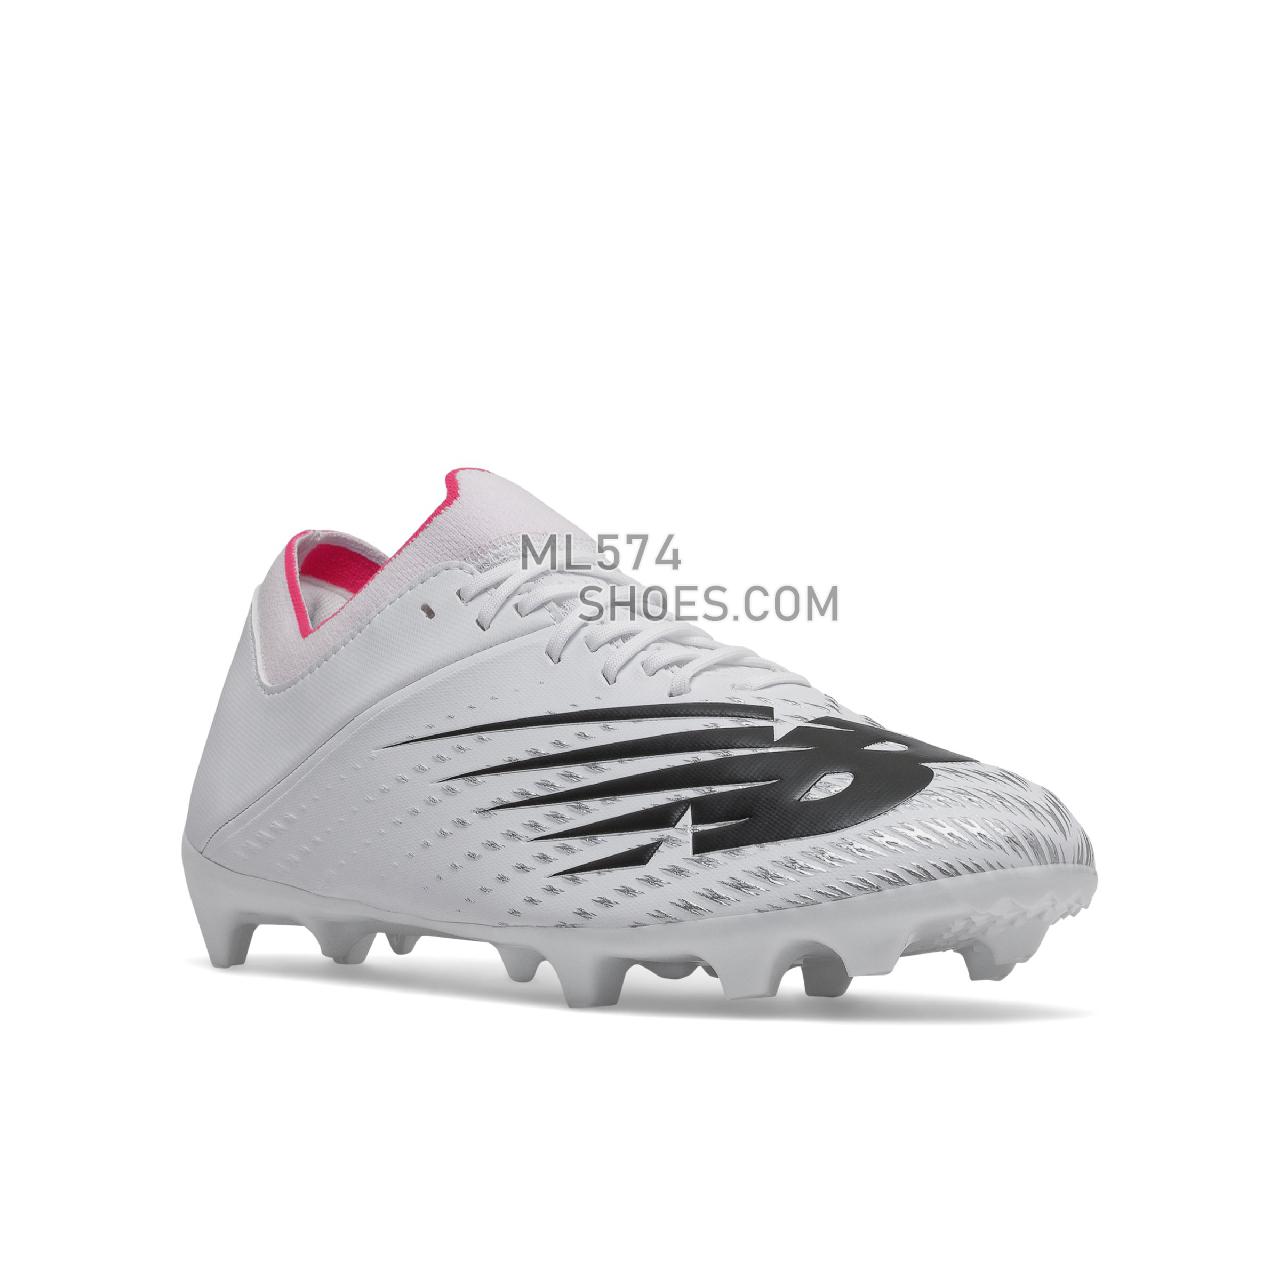 New Balance Furon V6+ Dispatch FG - Men's Soccer - White with Silver and Alpha Pink - MSF3FP65